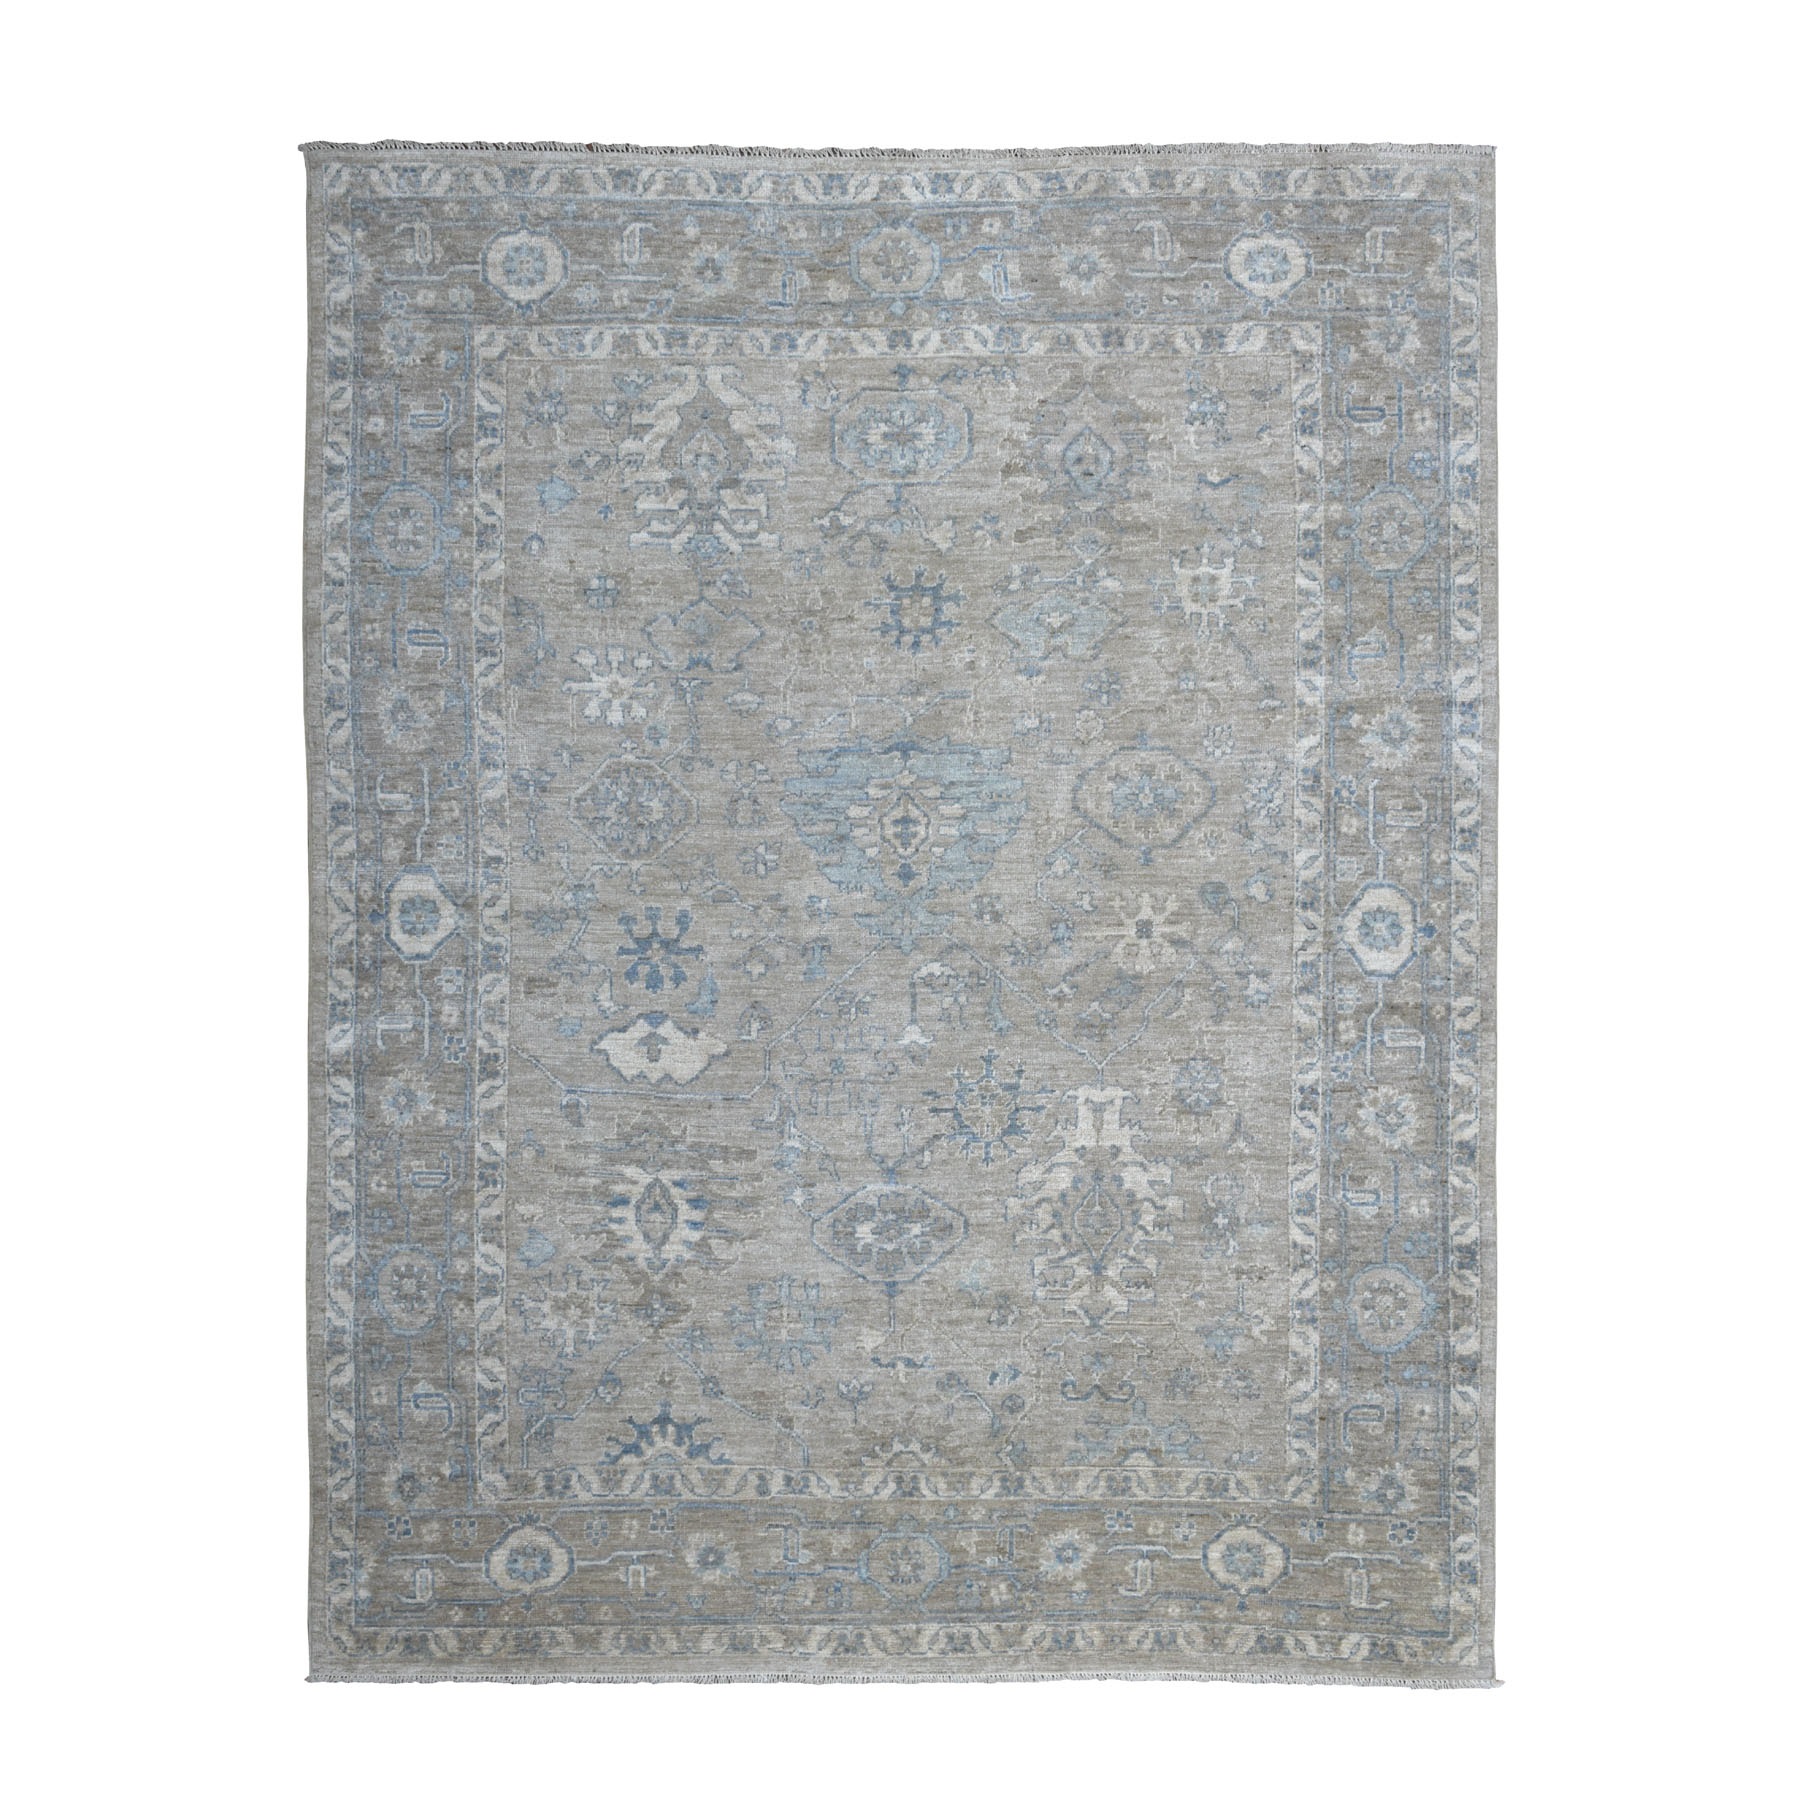 7-7 x10- Gray Angora Oushak With Soft Velvety Wool Hand Knotted Oriental Rug 